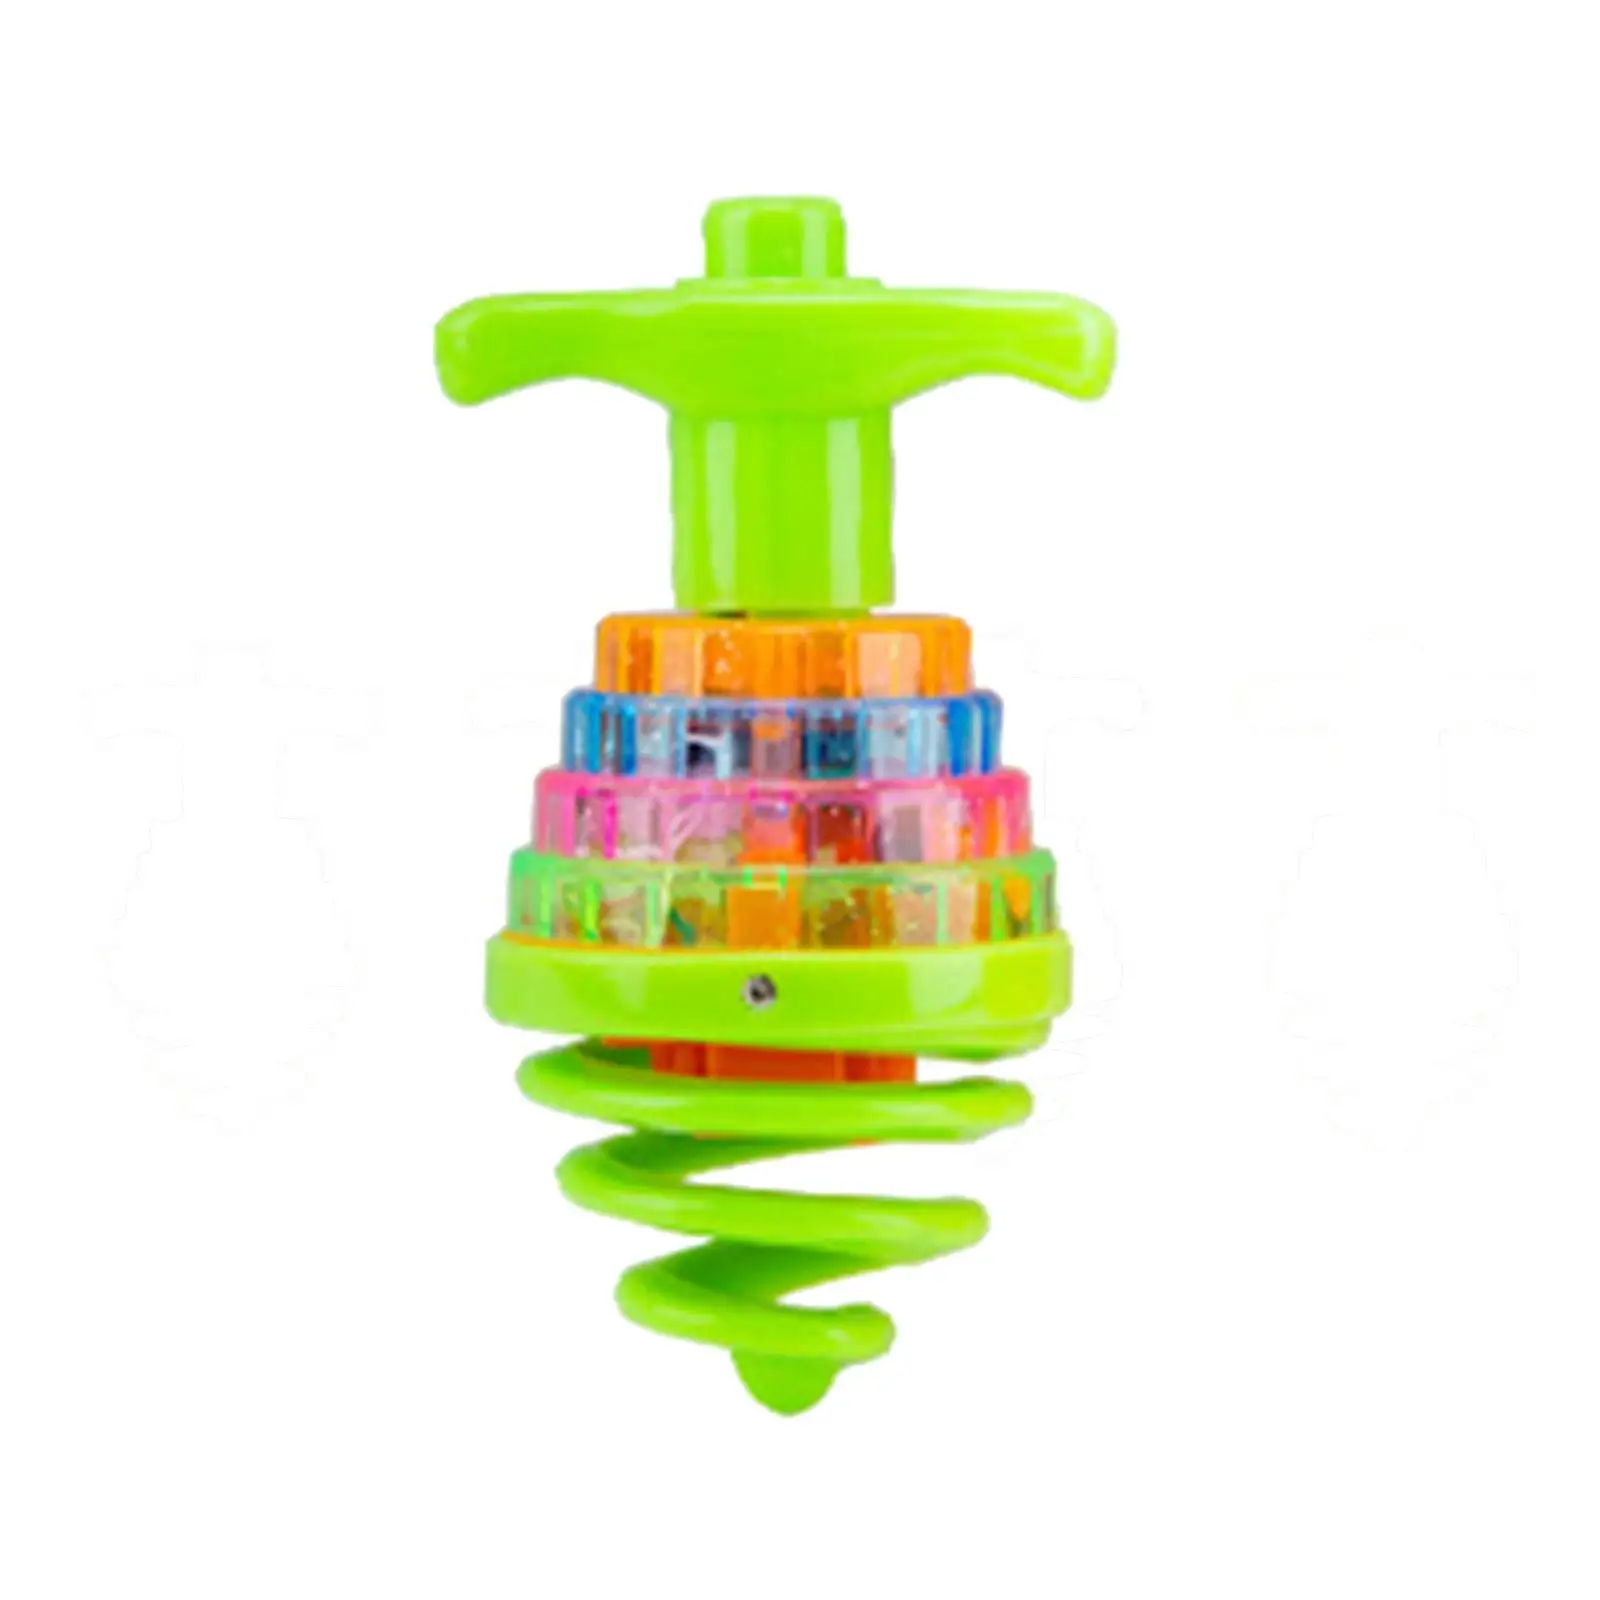 Top Toys Gyro Novelty Traditional Baby Toys Spiral Gyrator Exercise Child Cognition Rotating Top for Party Favor